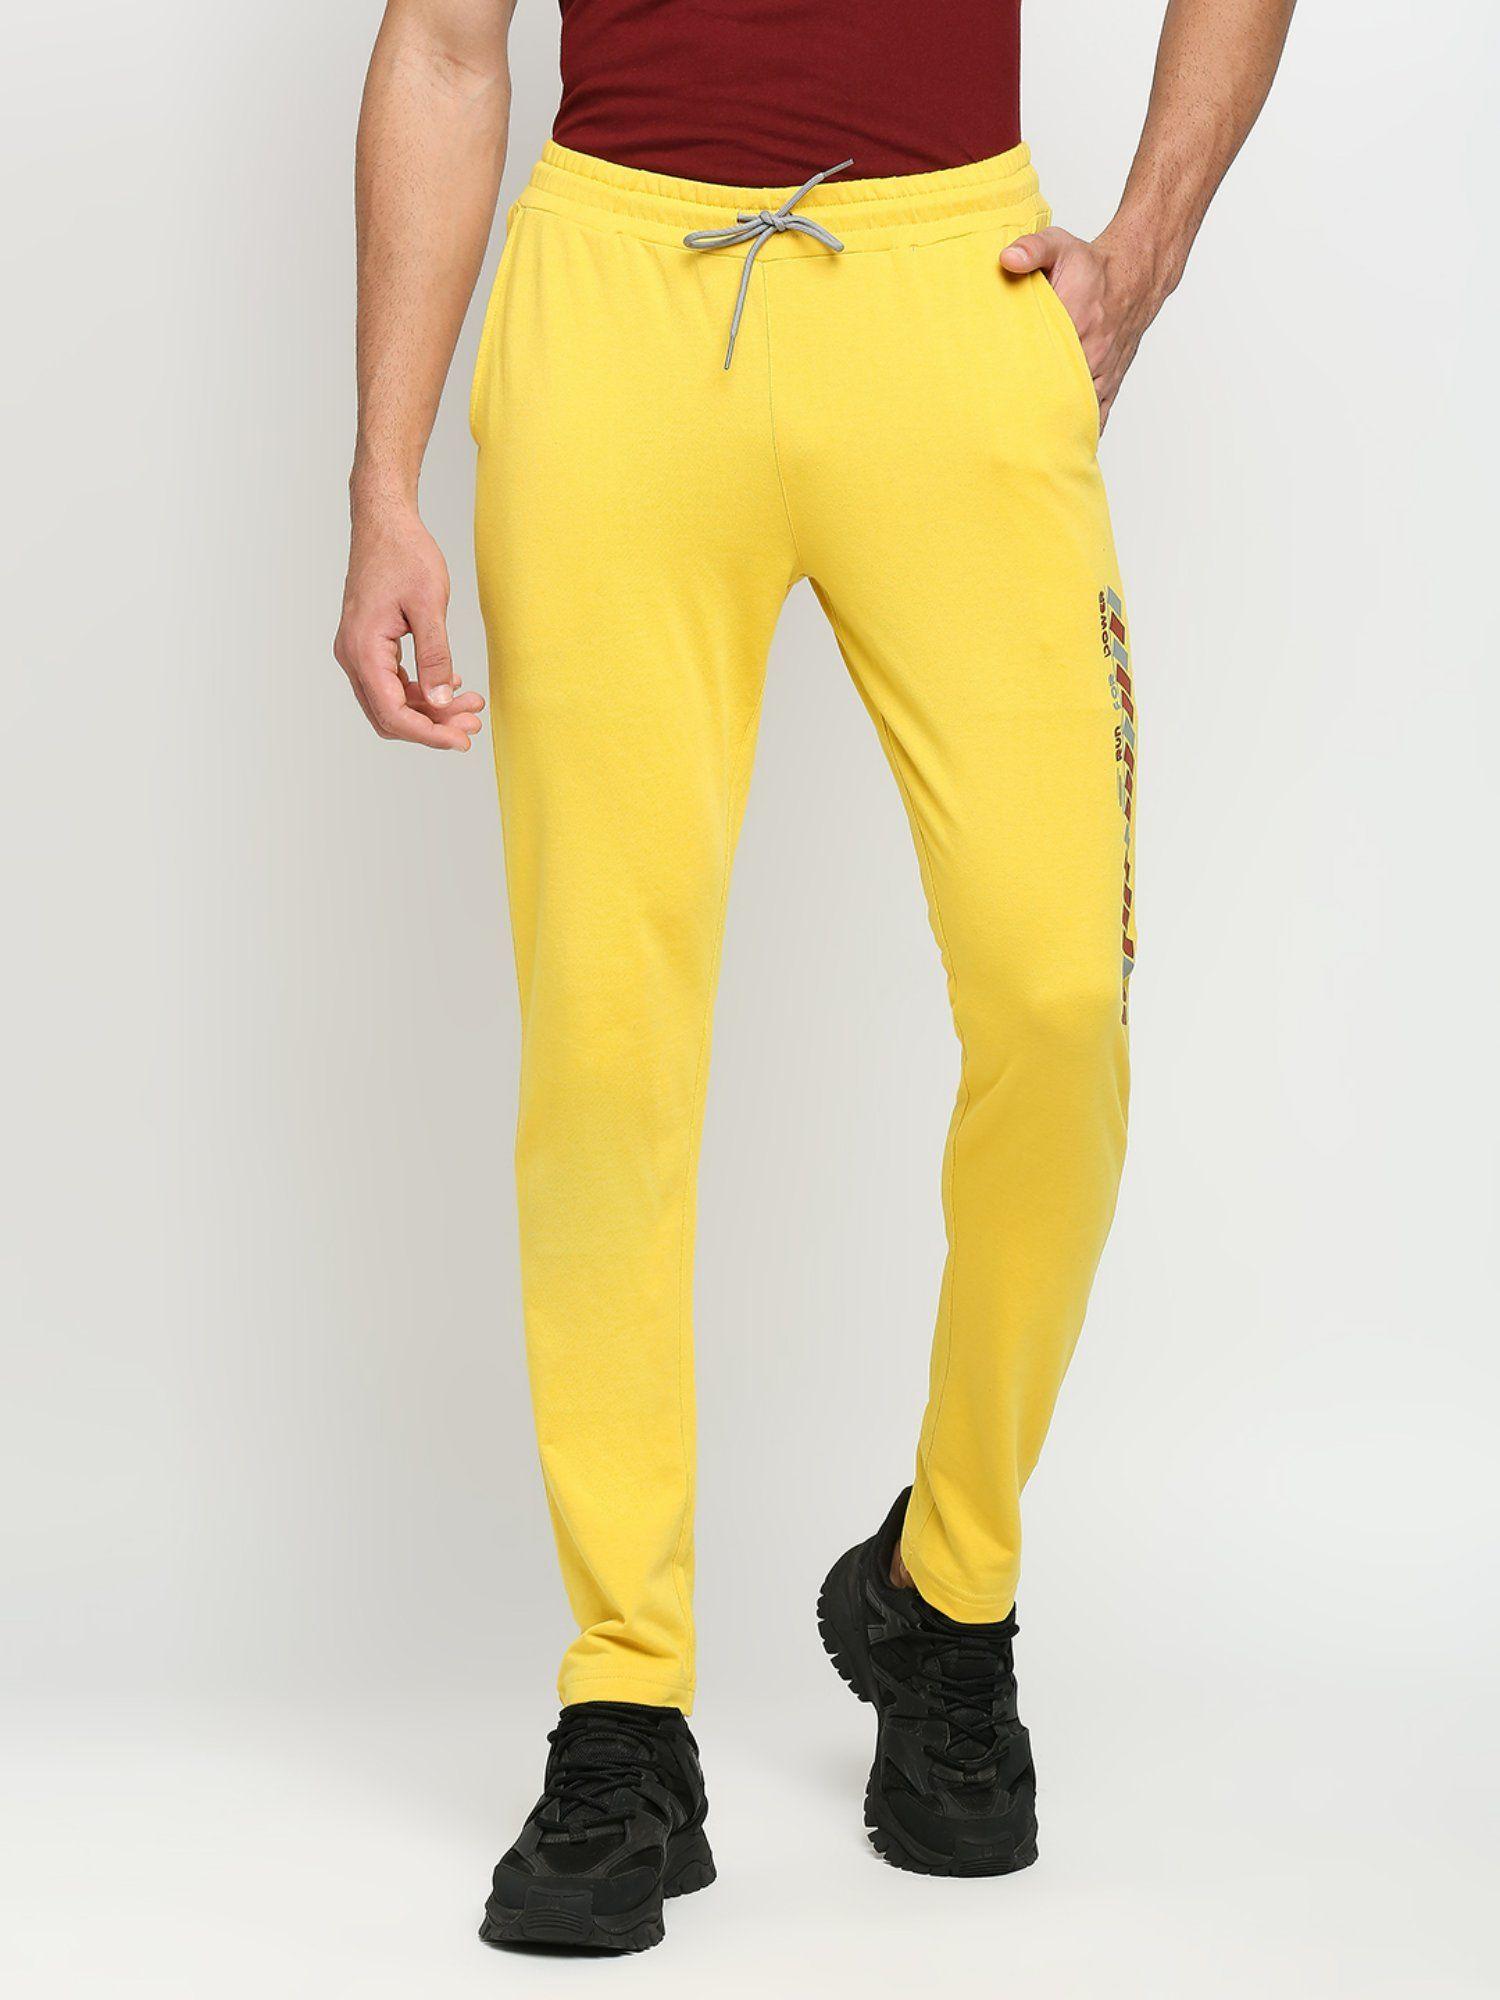 cotton polyester slim fit french terry knit joggers for mens - yellow